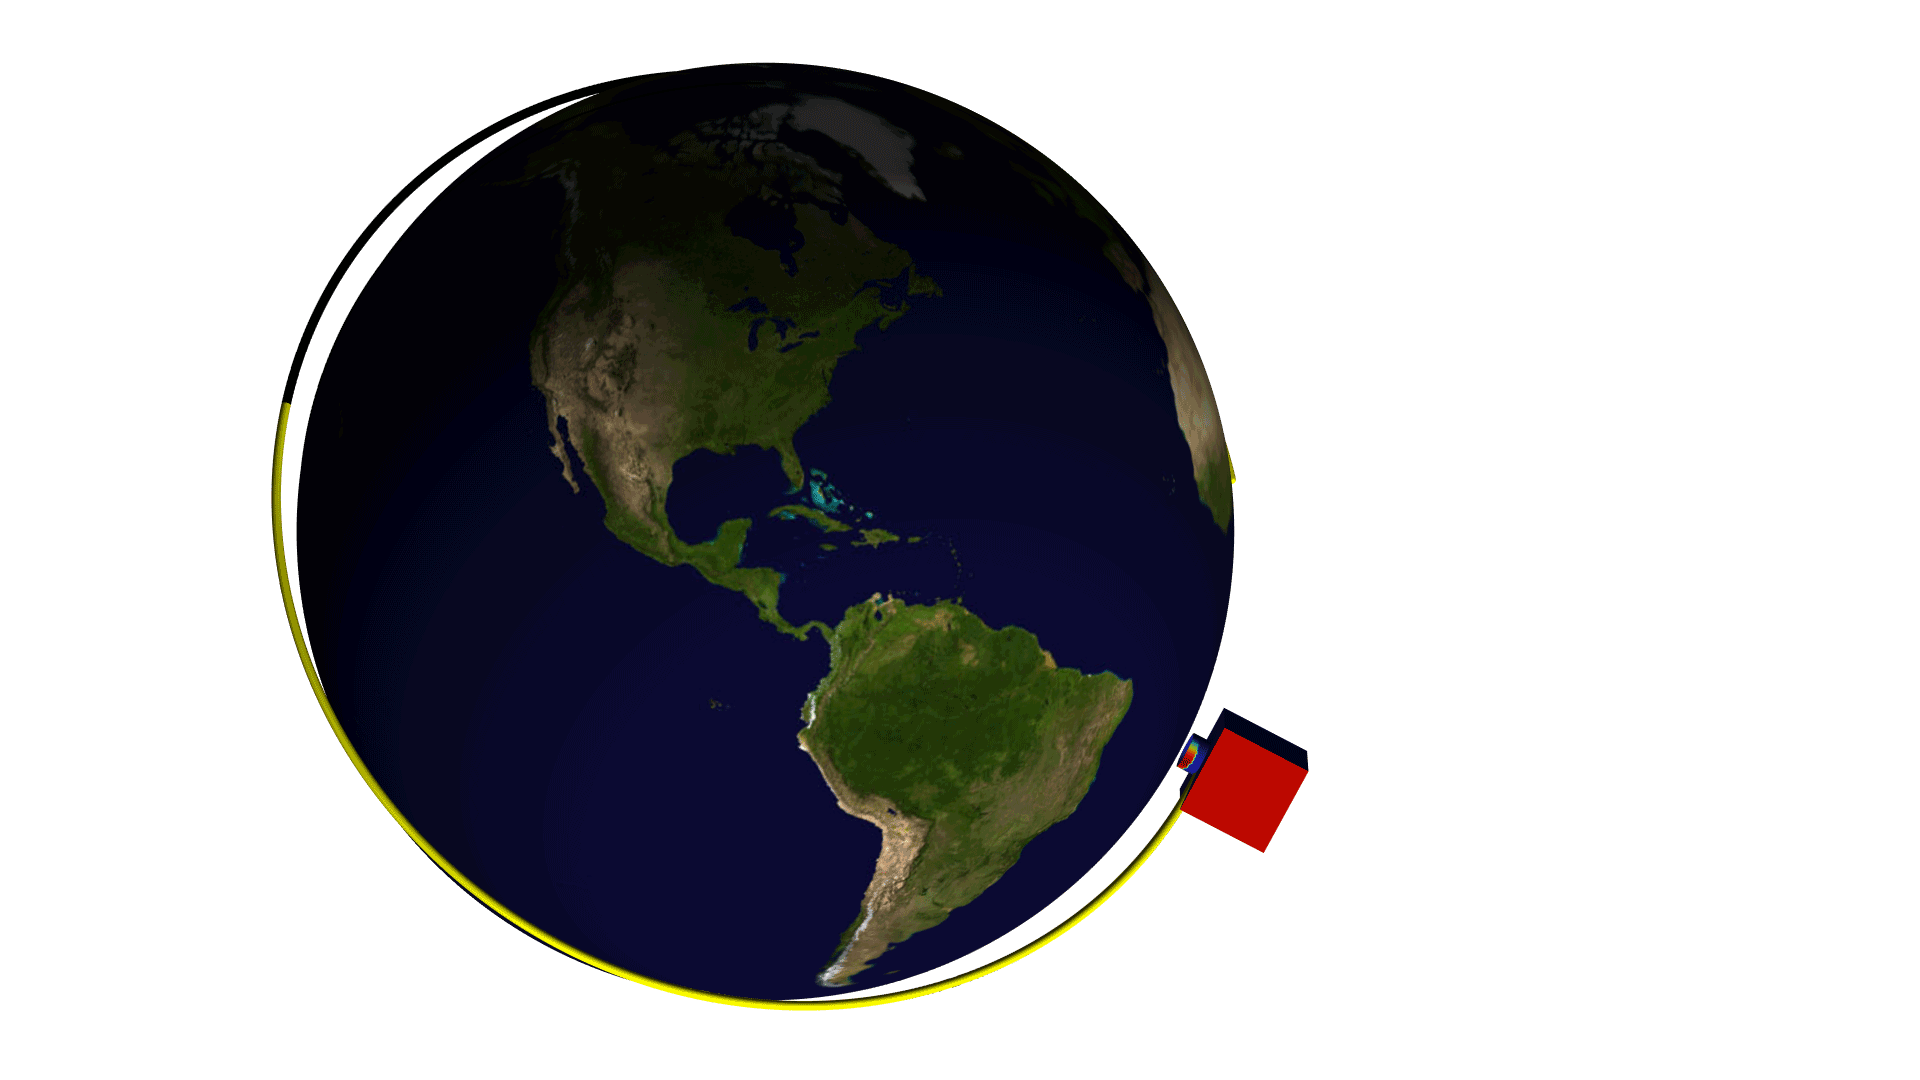 An orbit of a satellite around an Earth model showing the magnitude of the incident solar radiation.